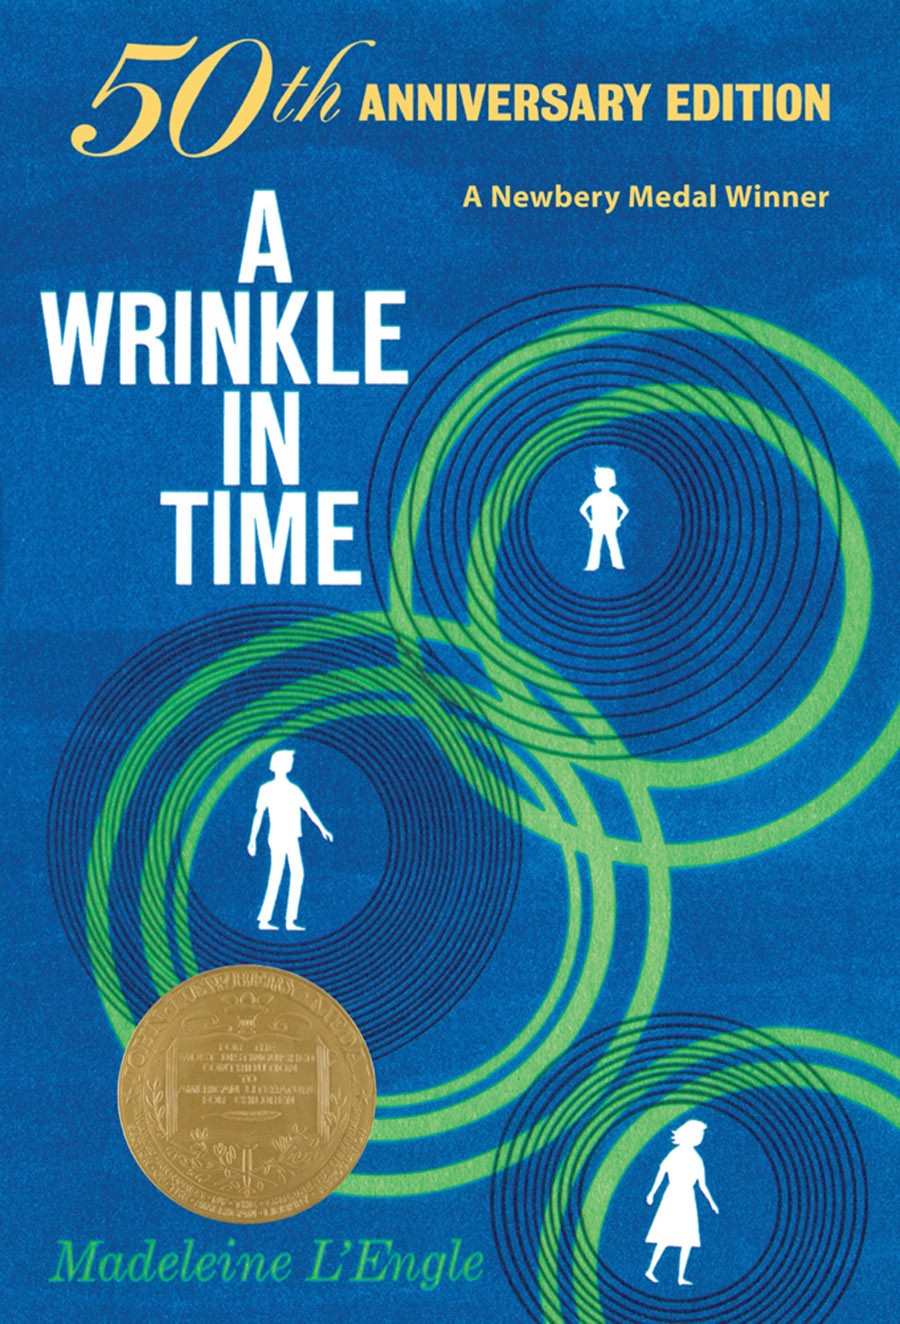 A Wrinkle in Time - 50th Anniversary Paperback